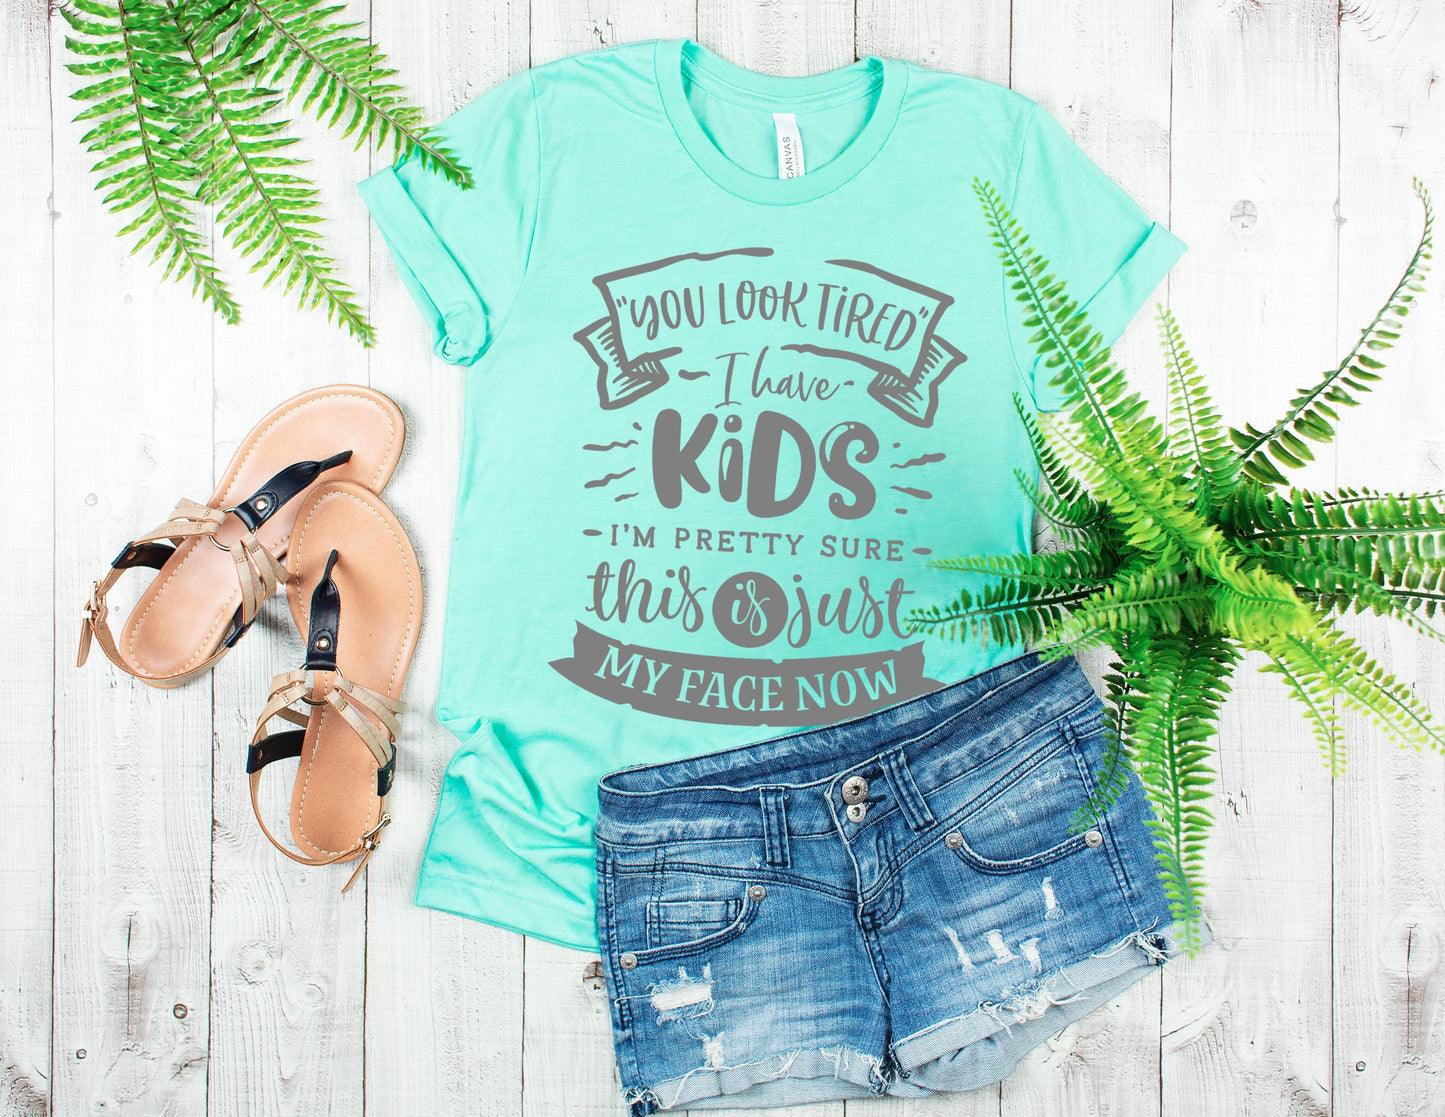 You Look Tired - I Have Kids unisex t-shirt - funny mom t-shirt - shirt for mom - mom life - mama shirts - new mom gift - cute mom shirt